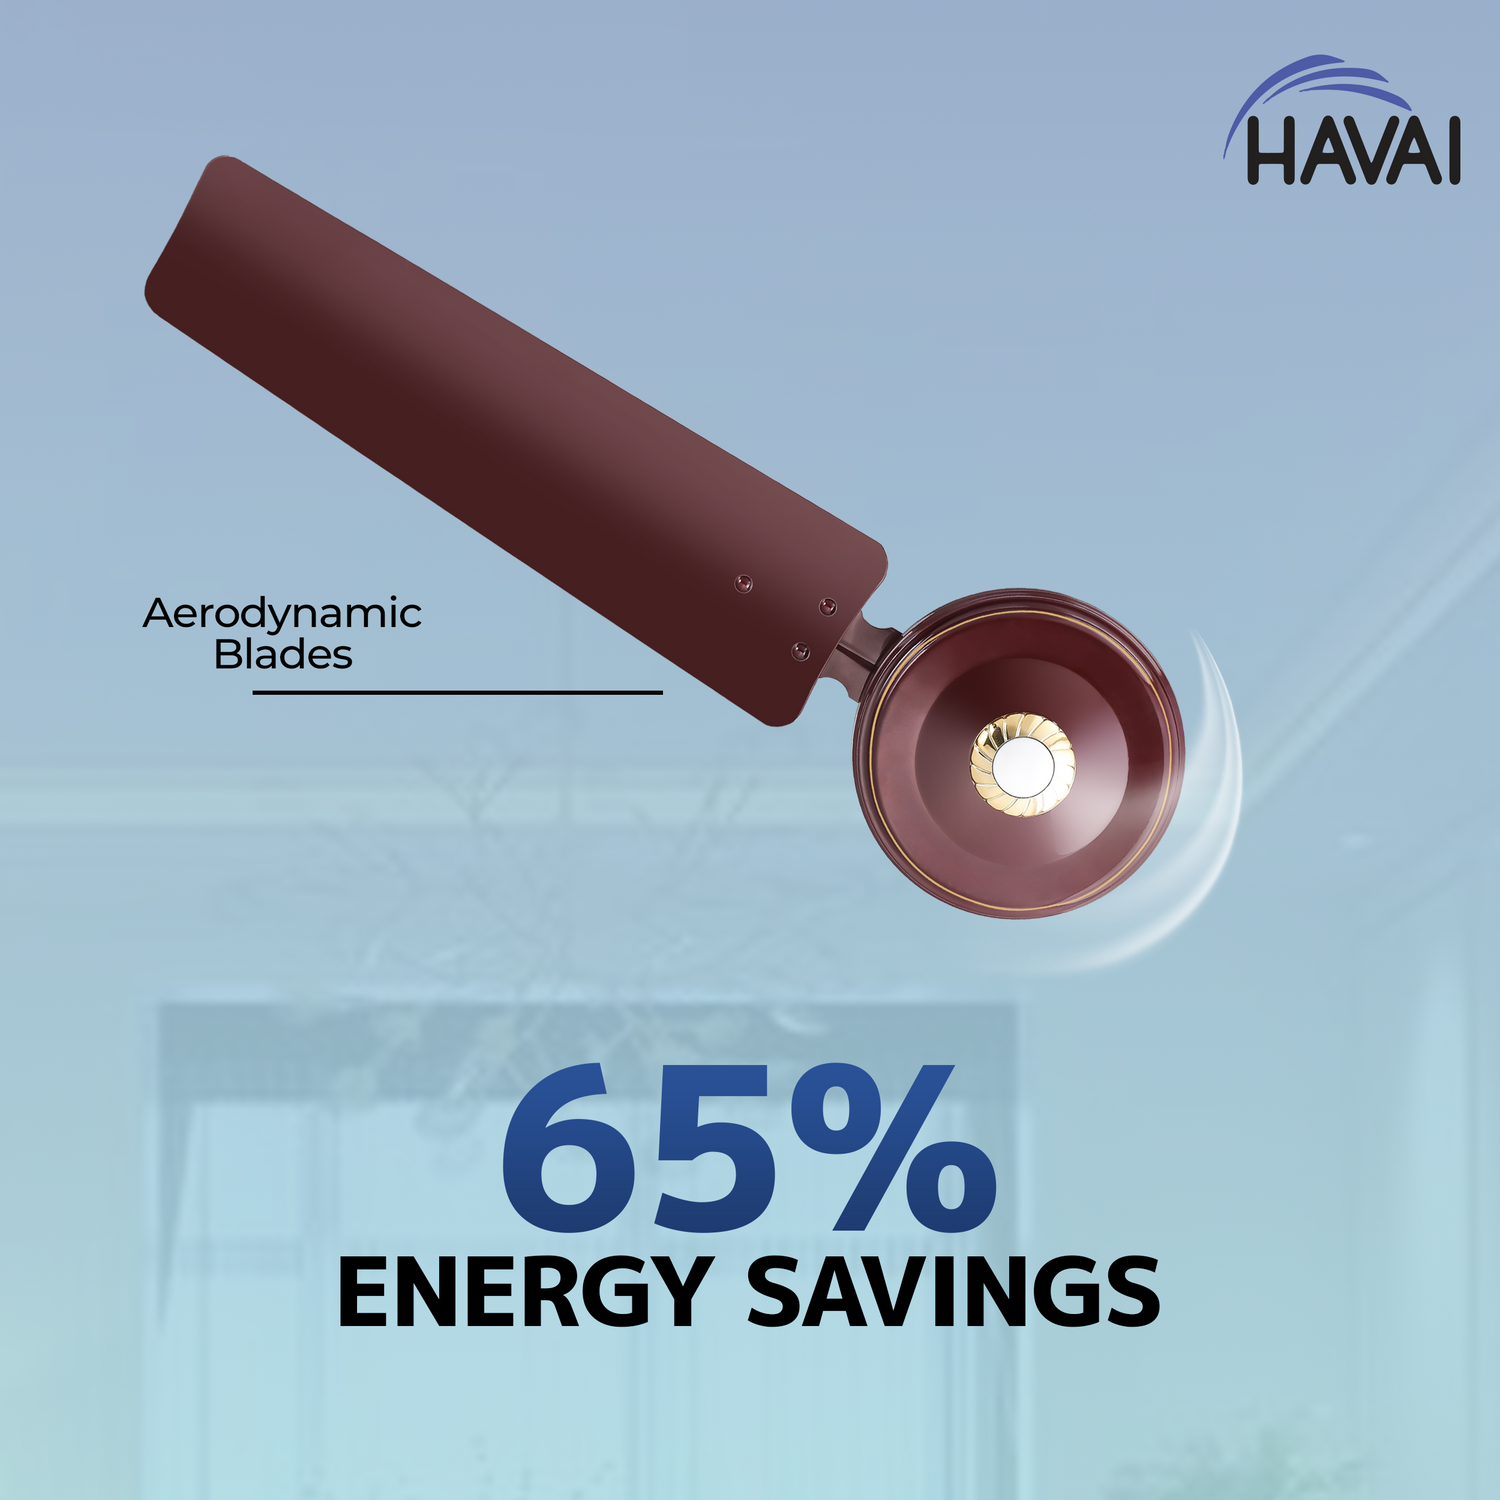 HAVAI Spinel BLDC Ceiling Fan 28W, 1200mm Blade with Remote - CHERRY BROWN